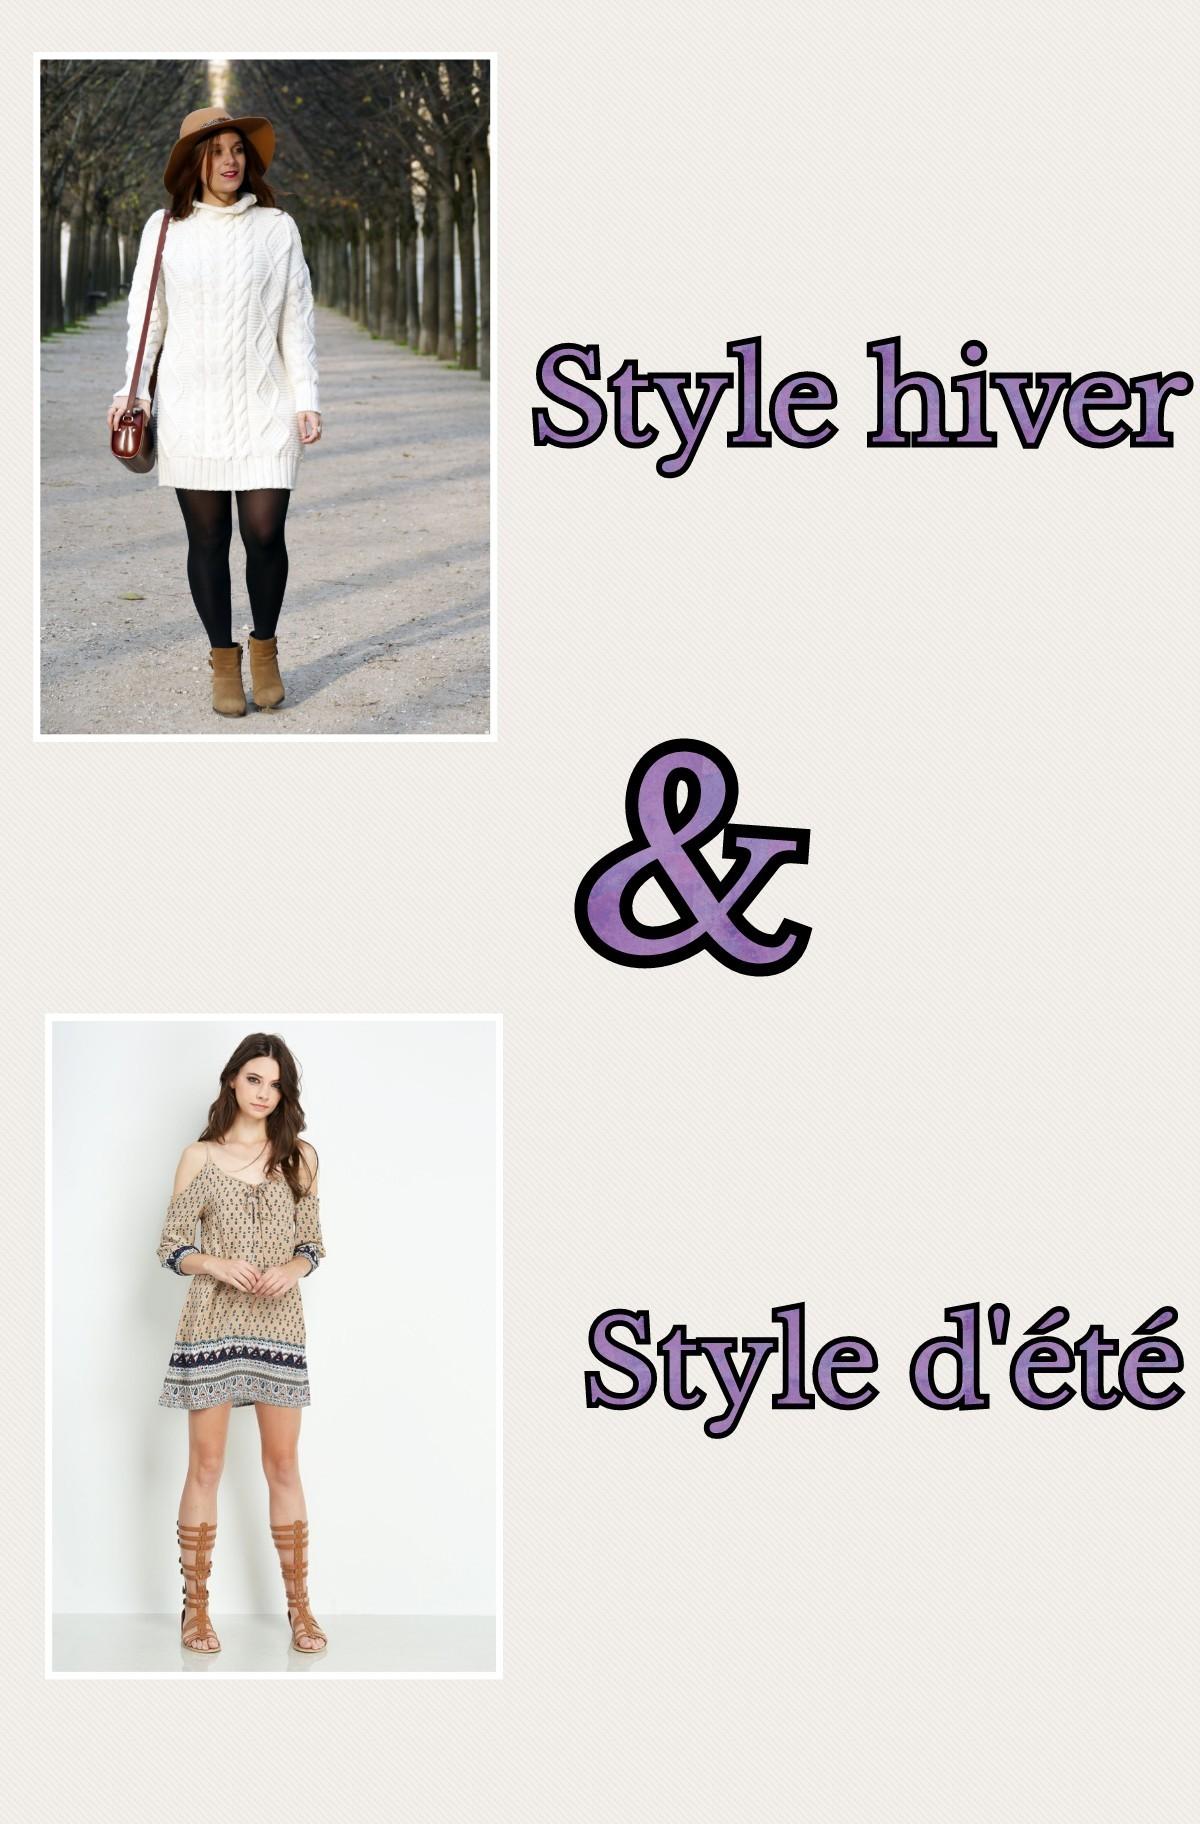 Style hiver
